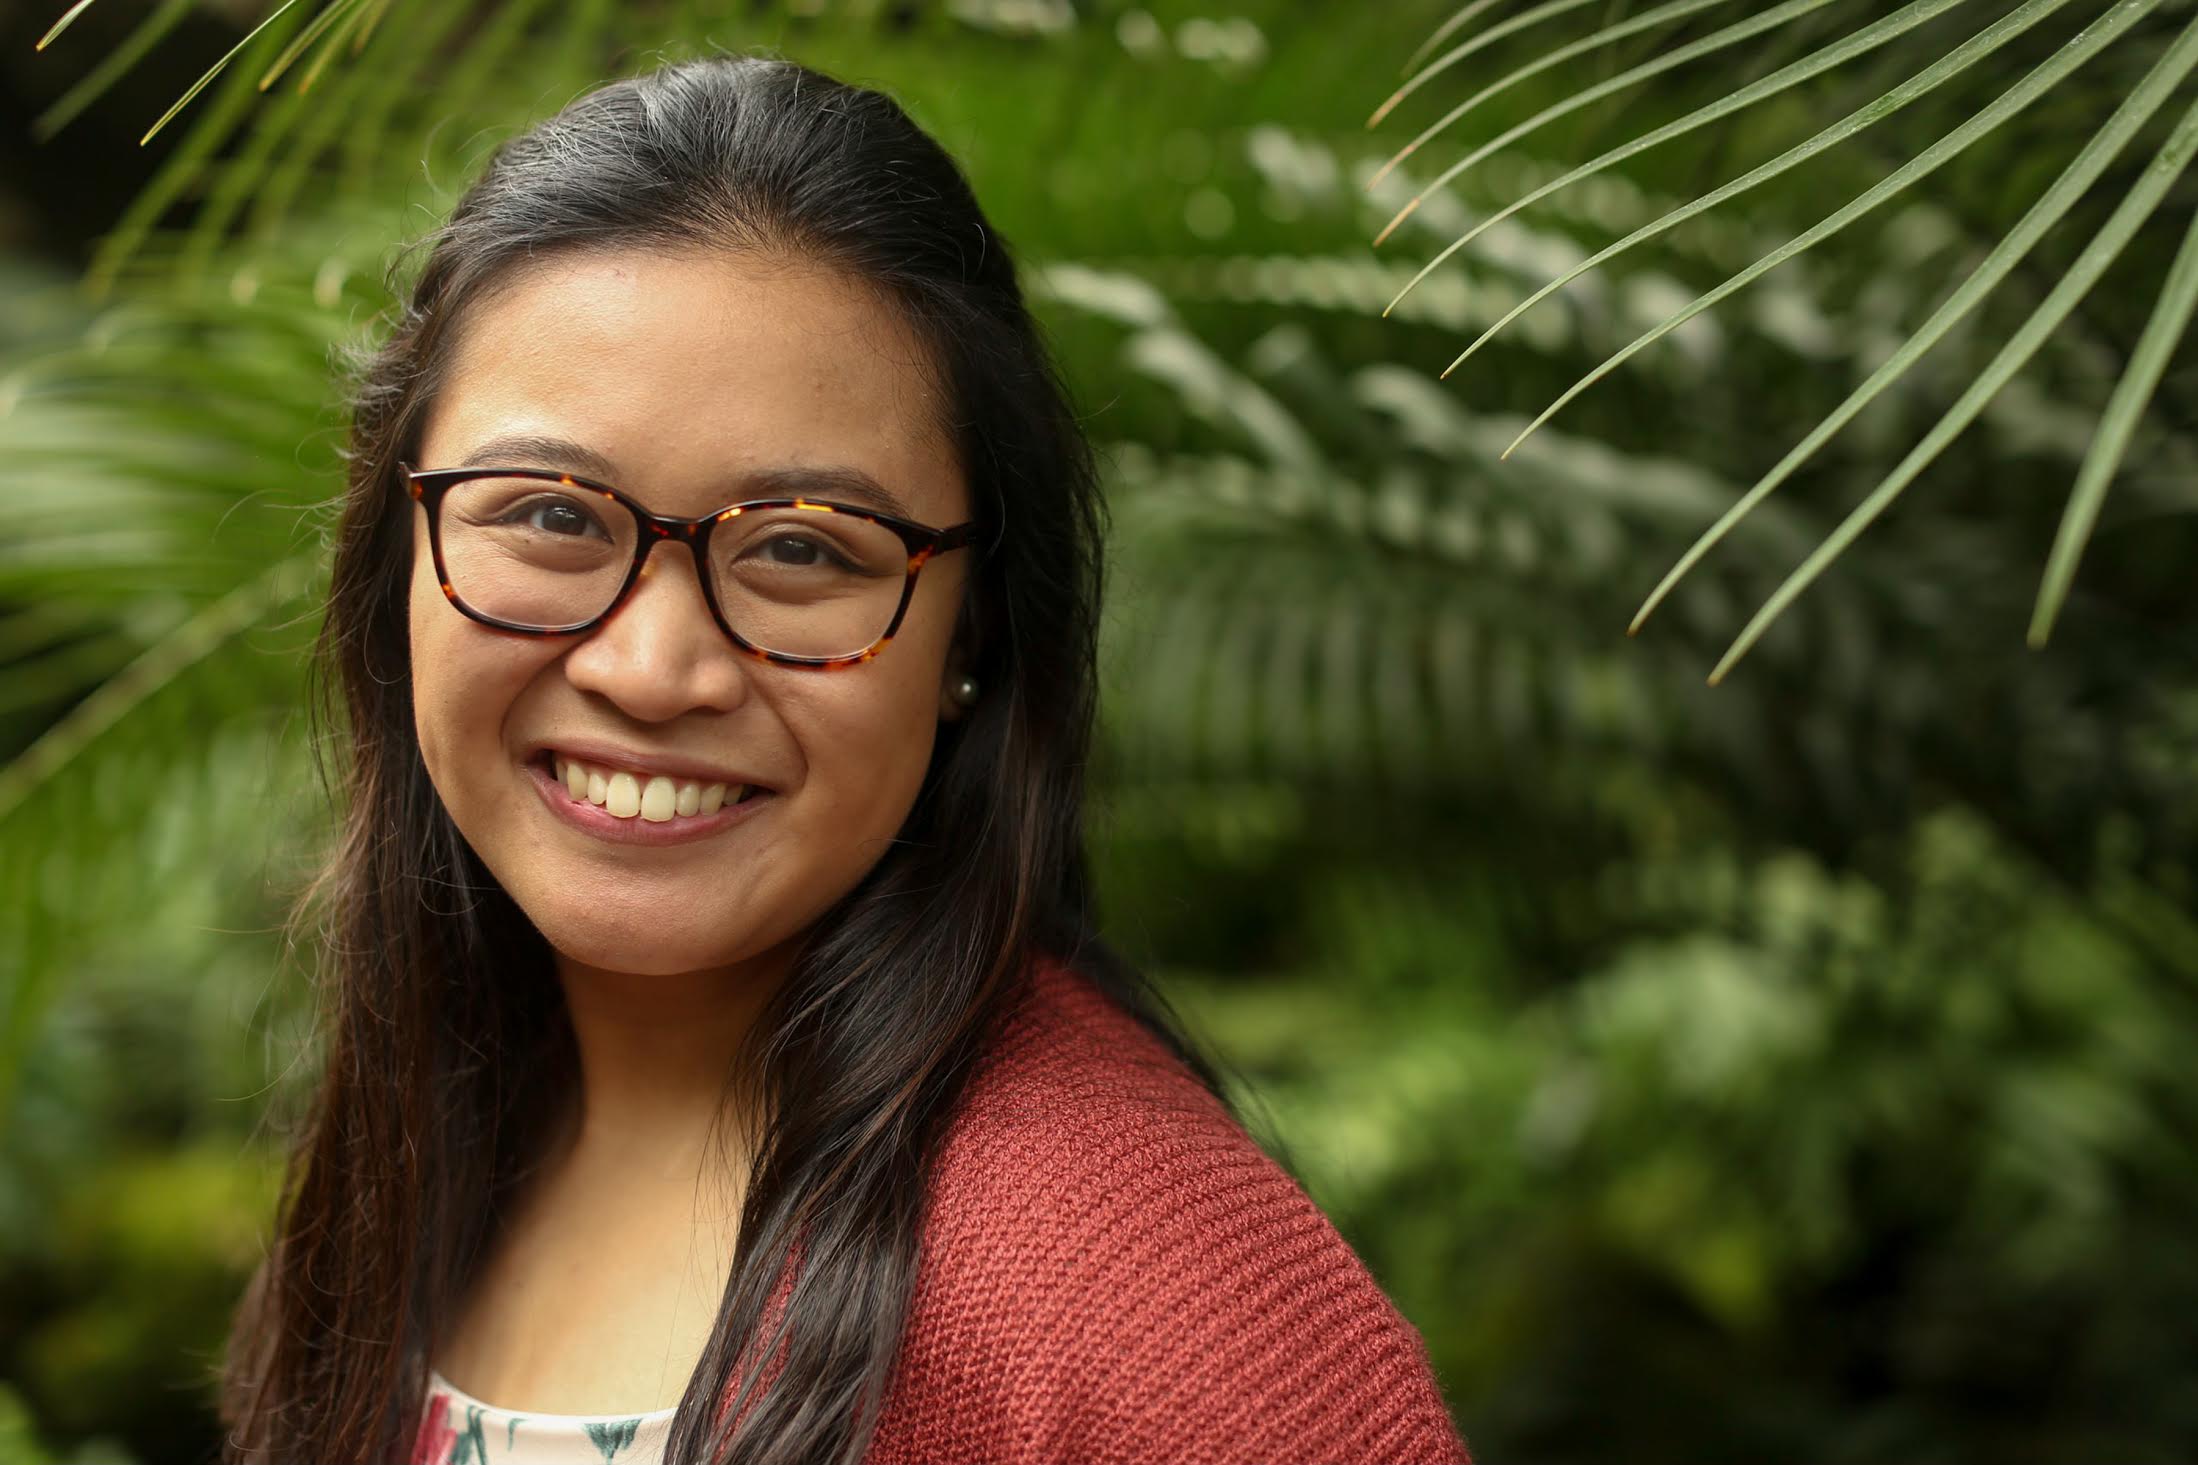 A head-and-shoulders shot of a young woman with medium-tone skin, long dark straight hair, glasses, and a big smile. The background is live plants, perhaps palm fronds.